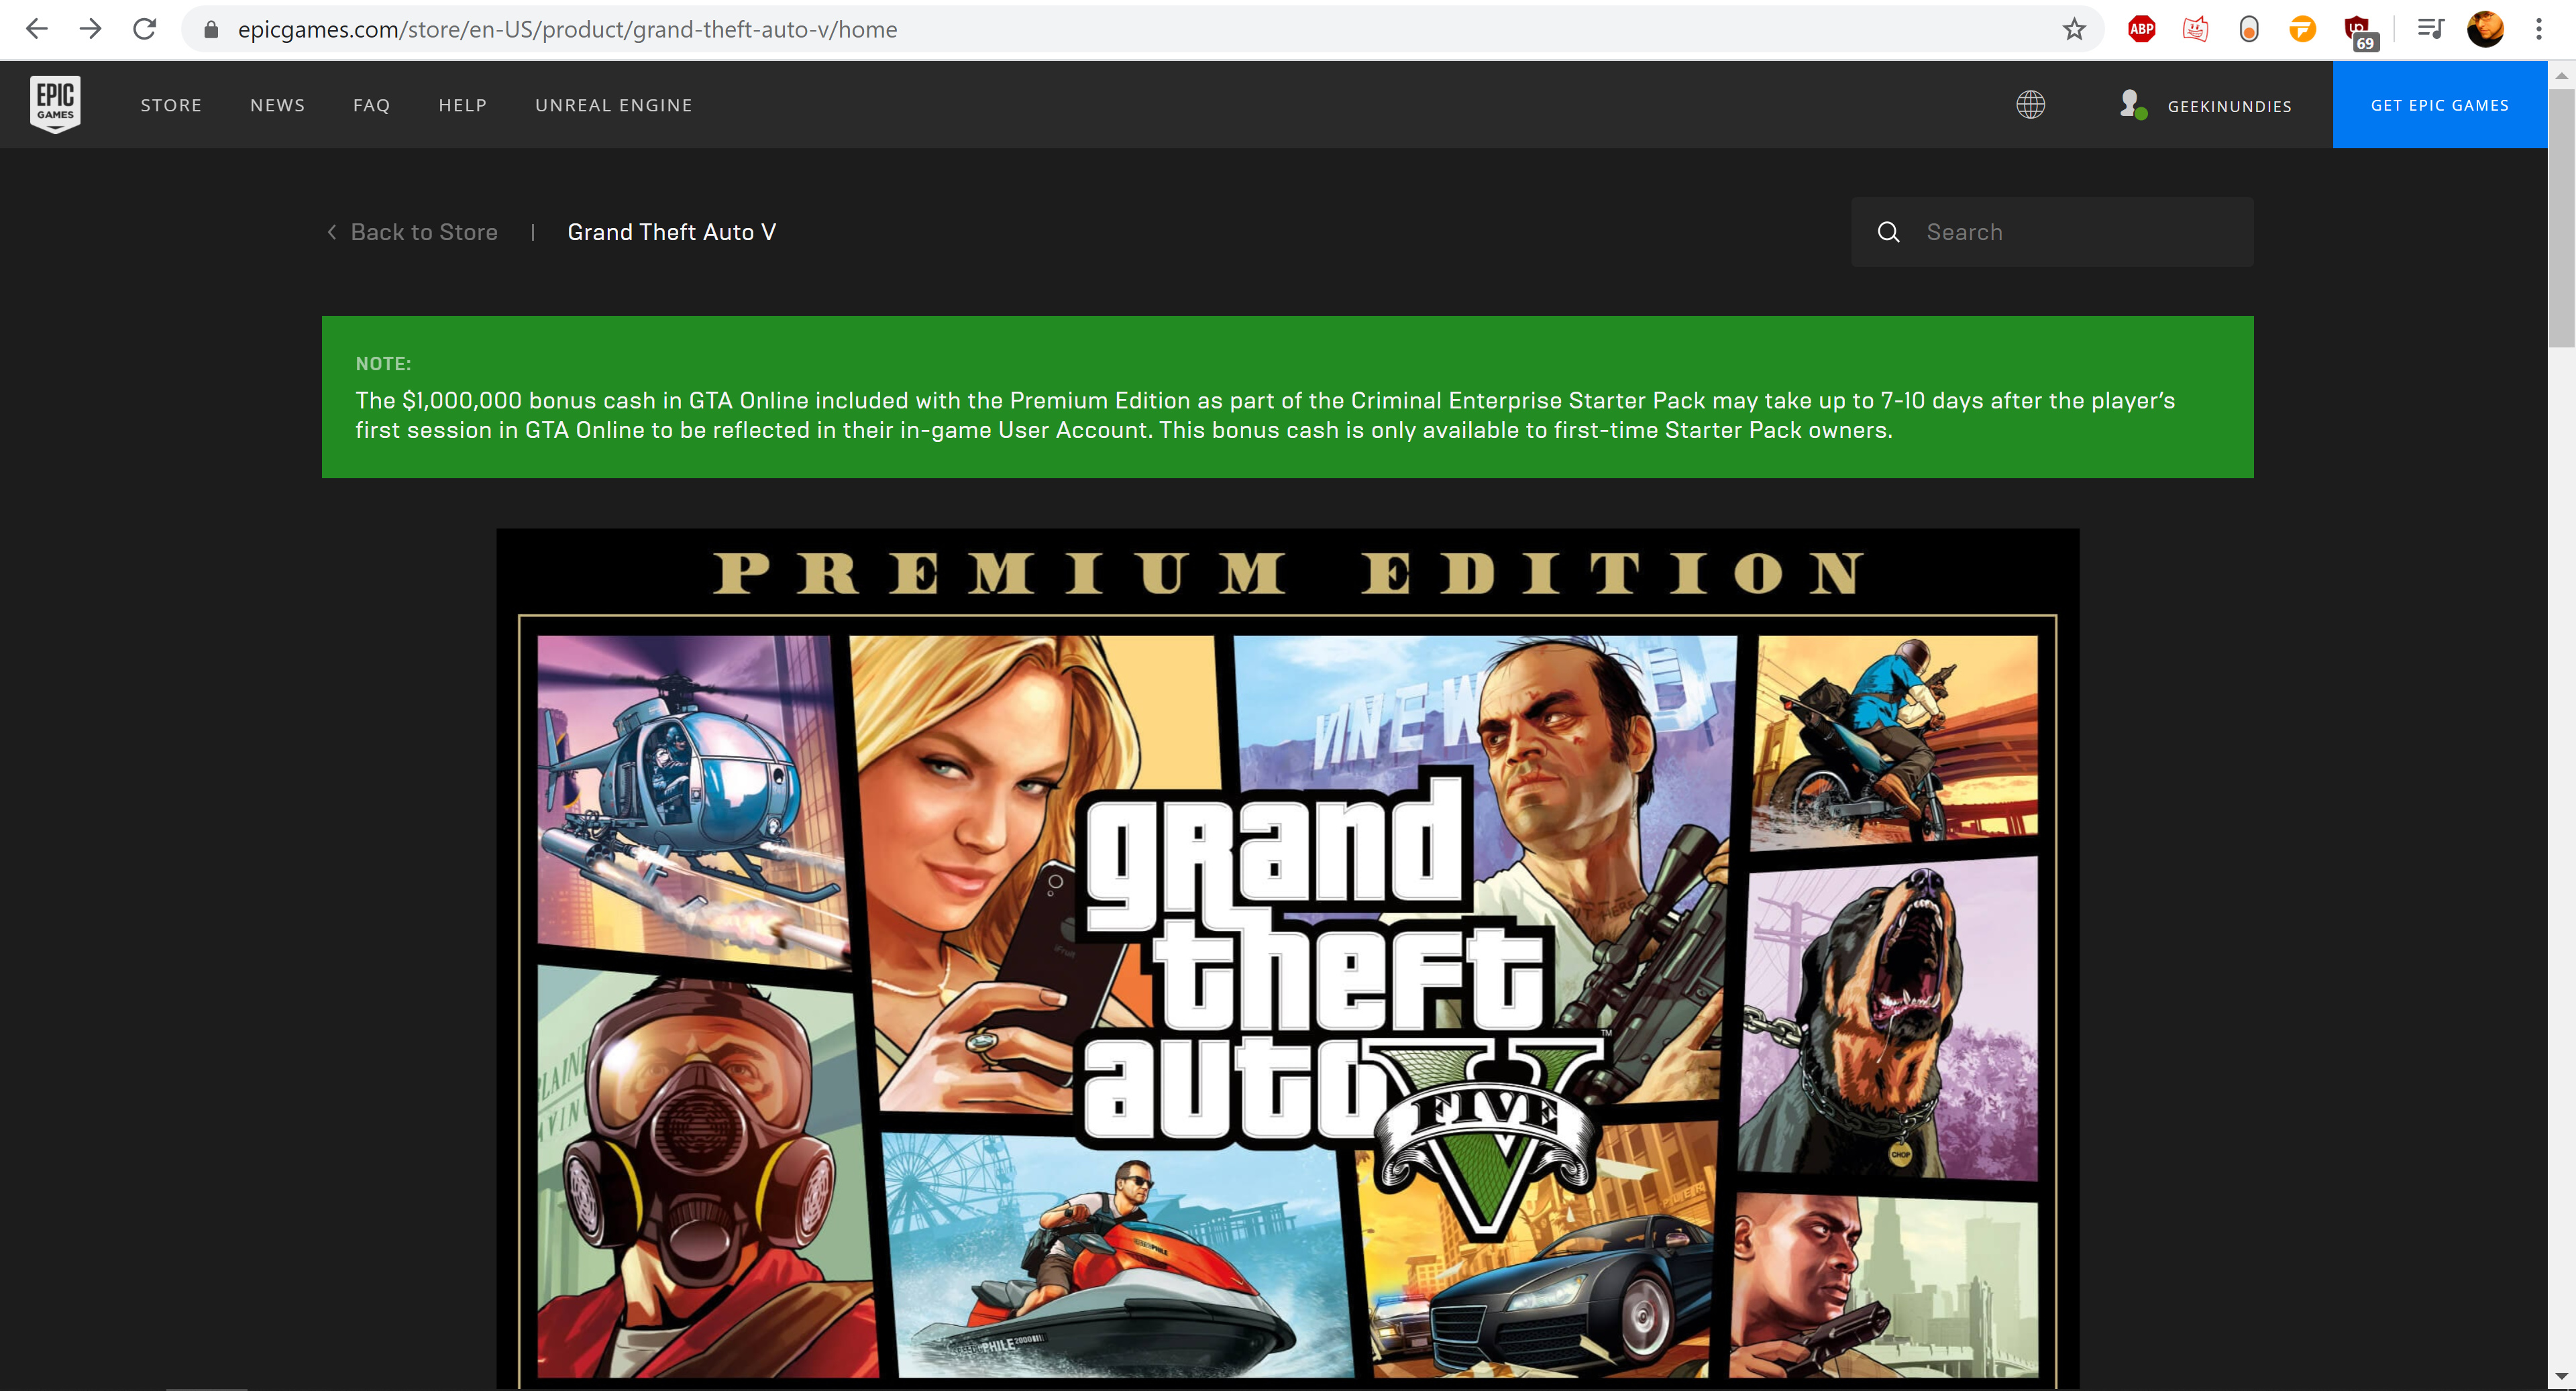 Grand Theft Auto V is free on the Epic Games Store this week